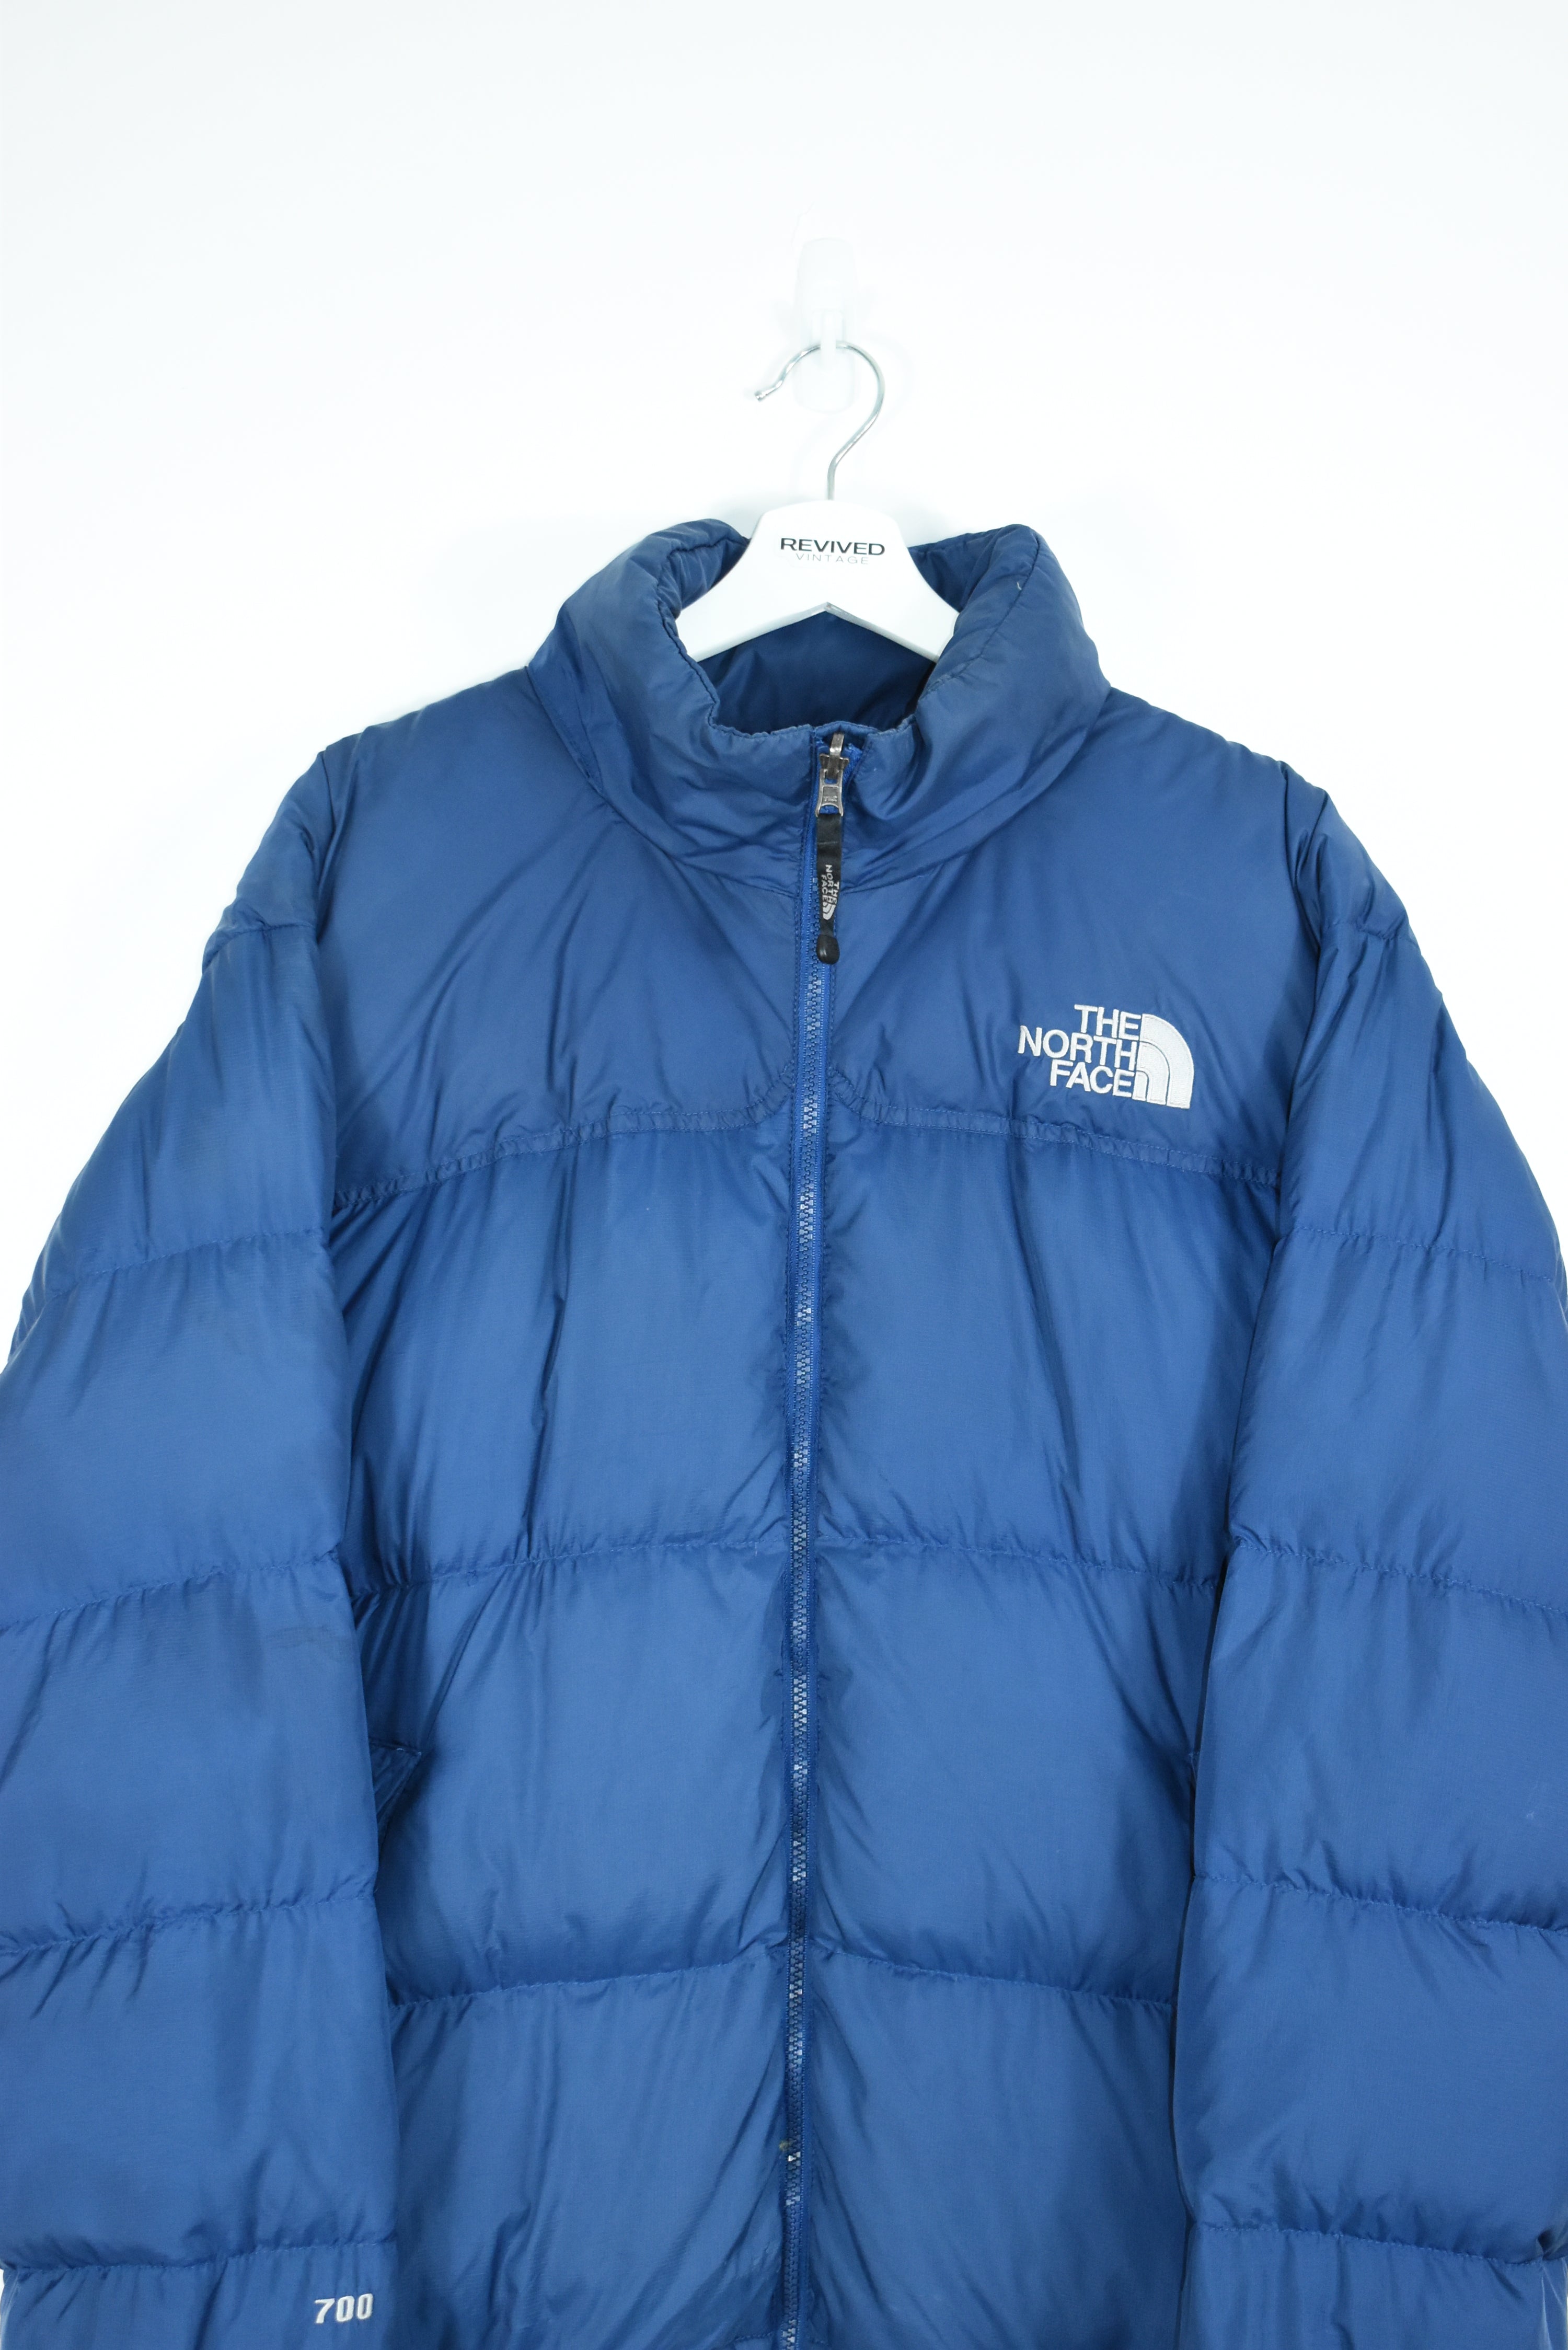 Vintage North Face Navy Puffer 700 Mens L/ XLARGE